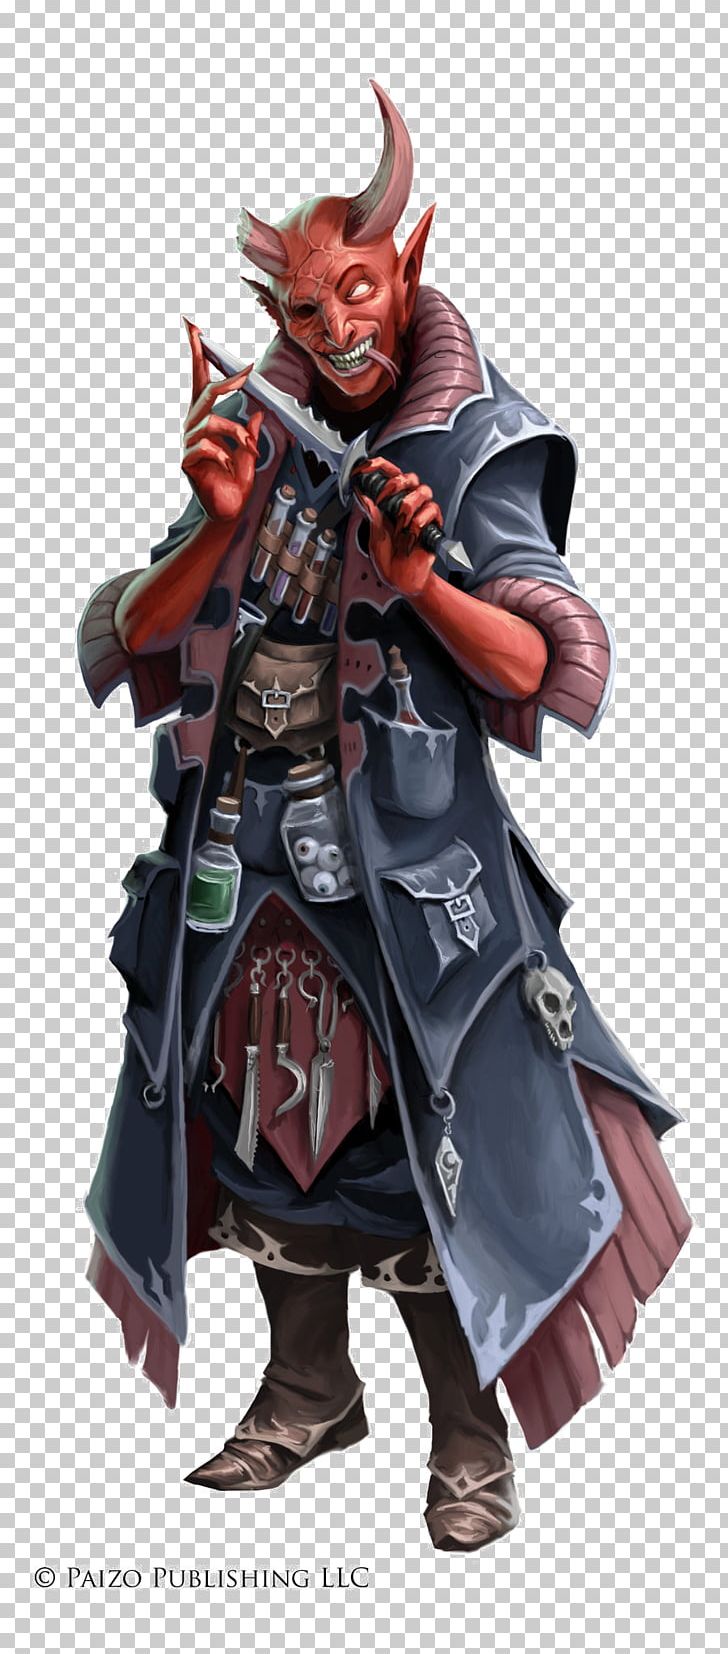 Pathfinder Roleplaying Game D20 System Dungeons & Dragons Tiefling Warlock PNG, Clipart, Adventure Path, Armour, Cartoon, D20 System, Dragonborn Free PNG Download